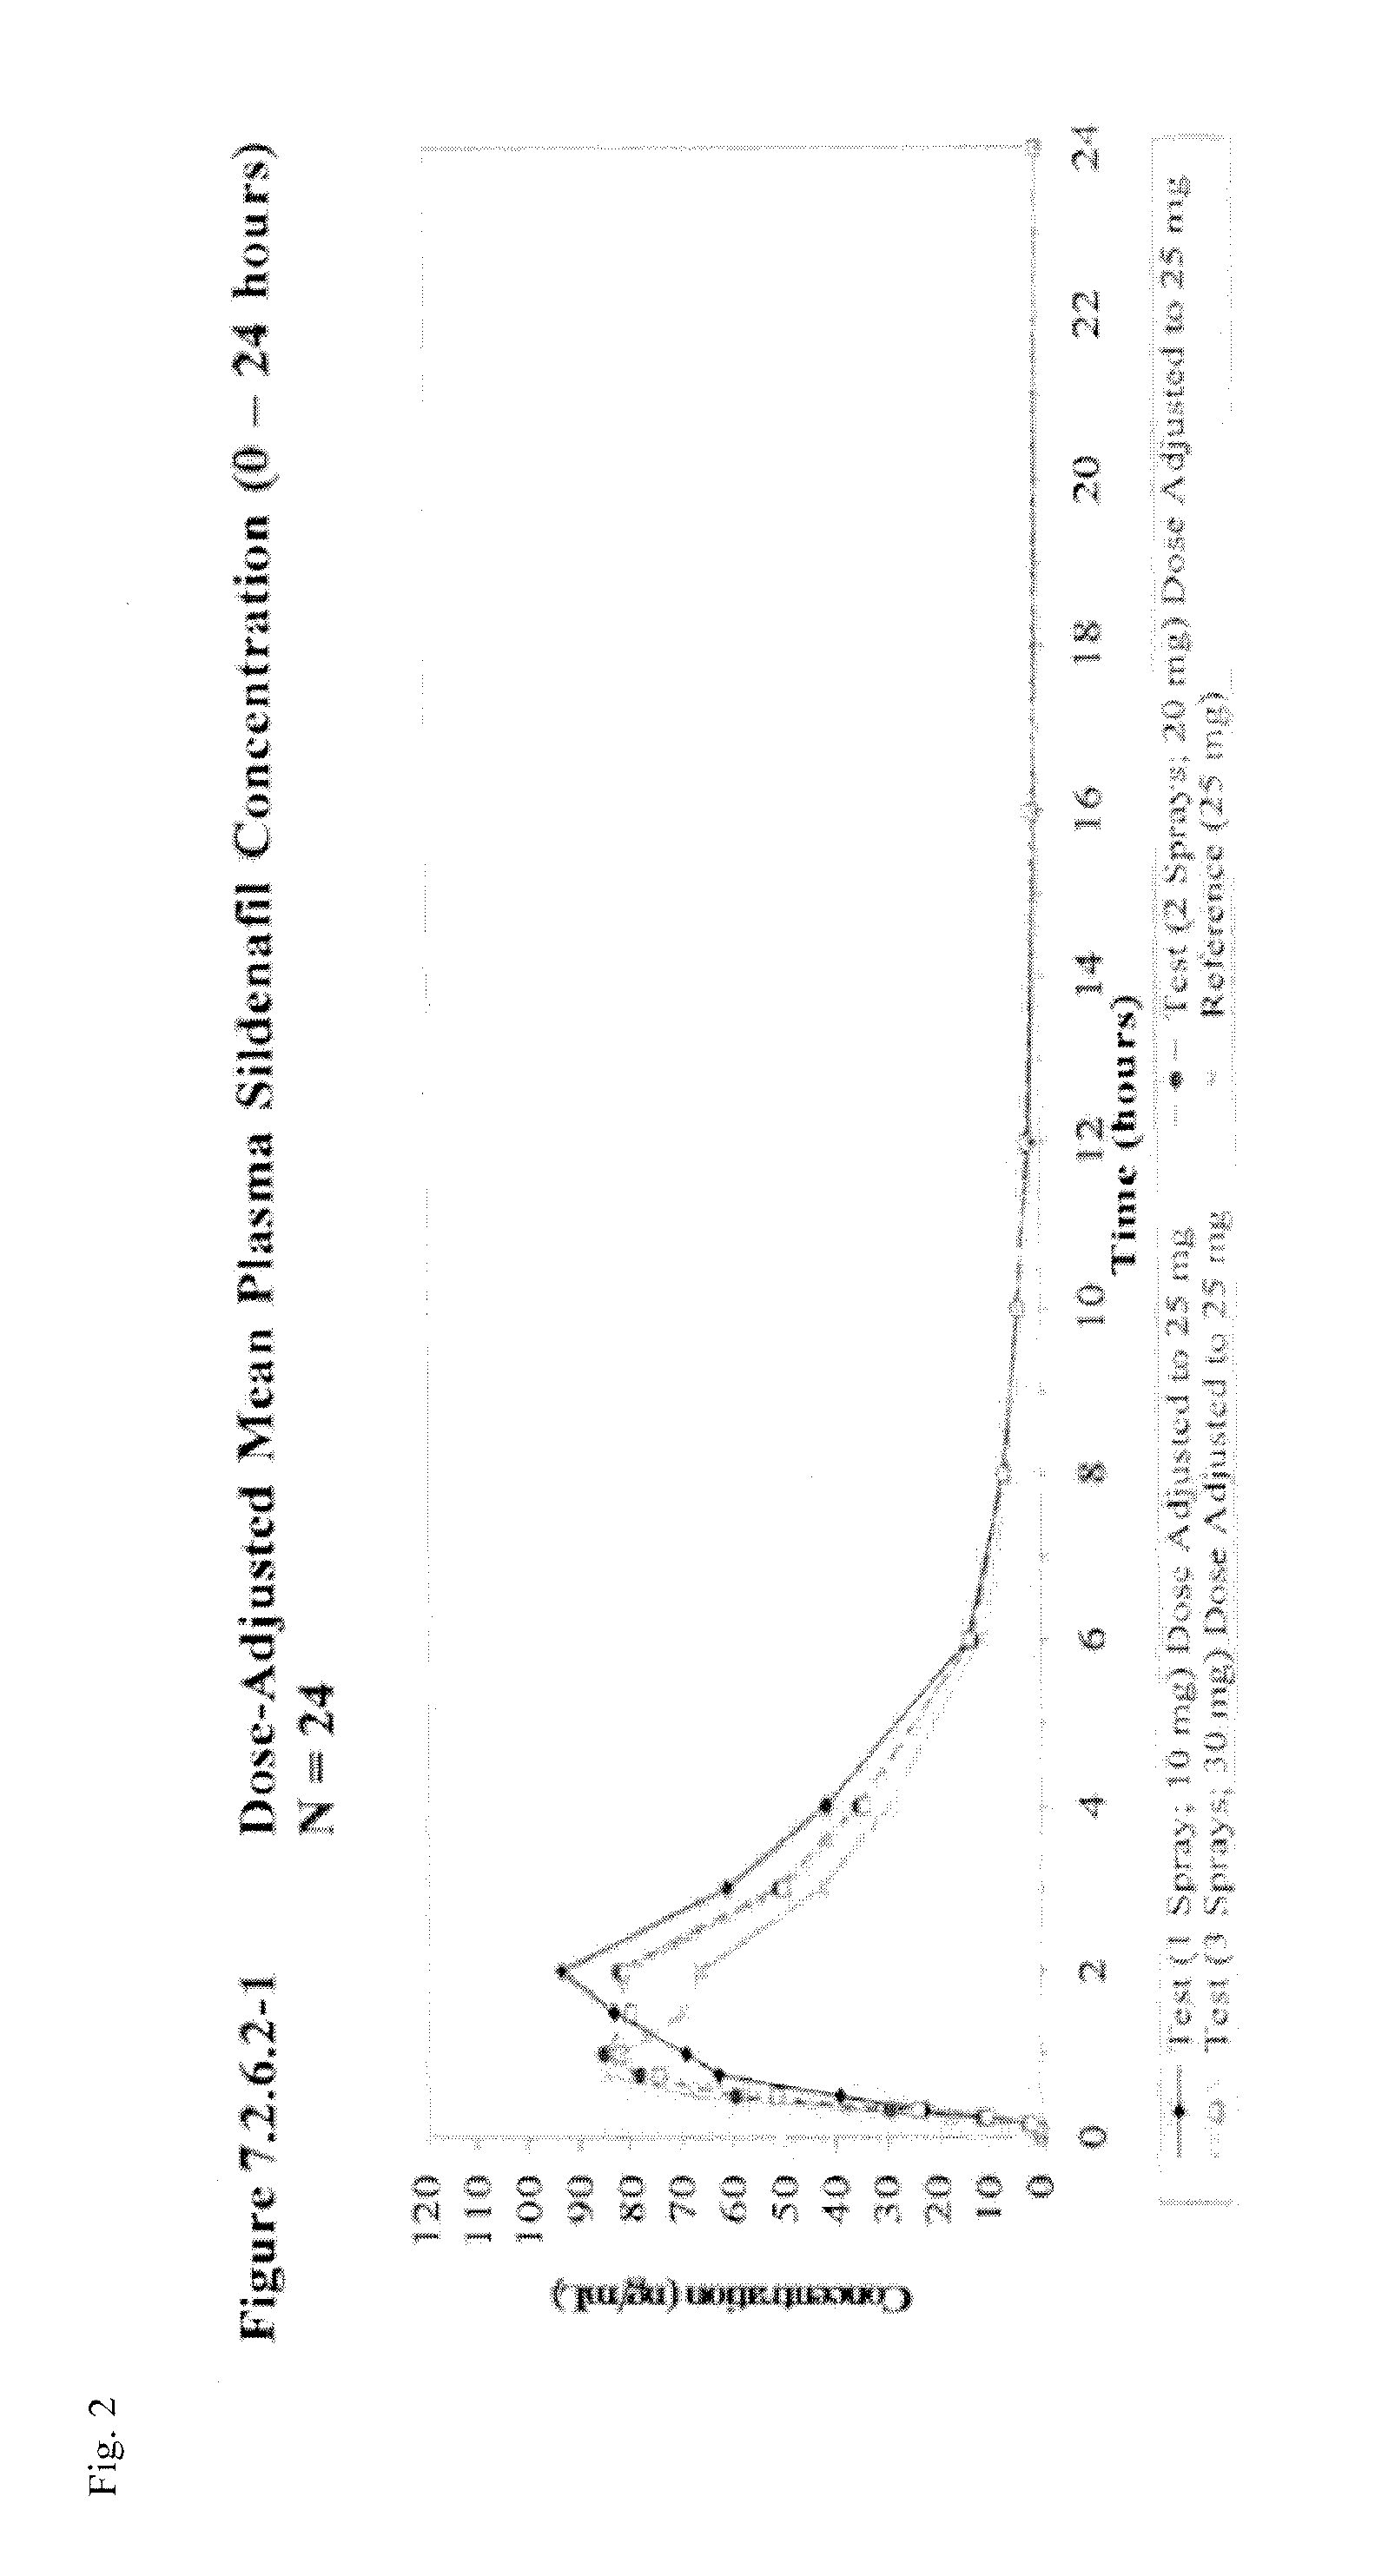 Oral spray formulations ad methods for administration of sildenafil